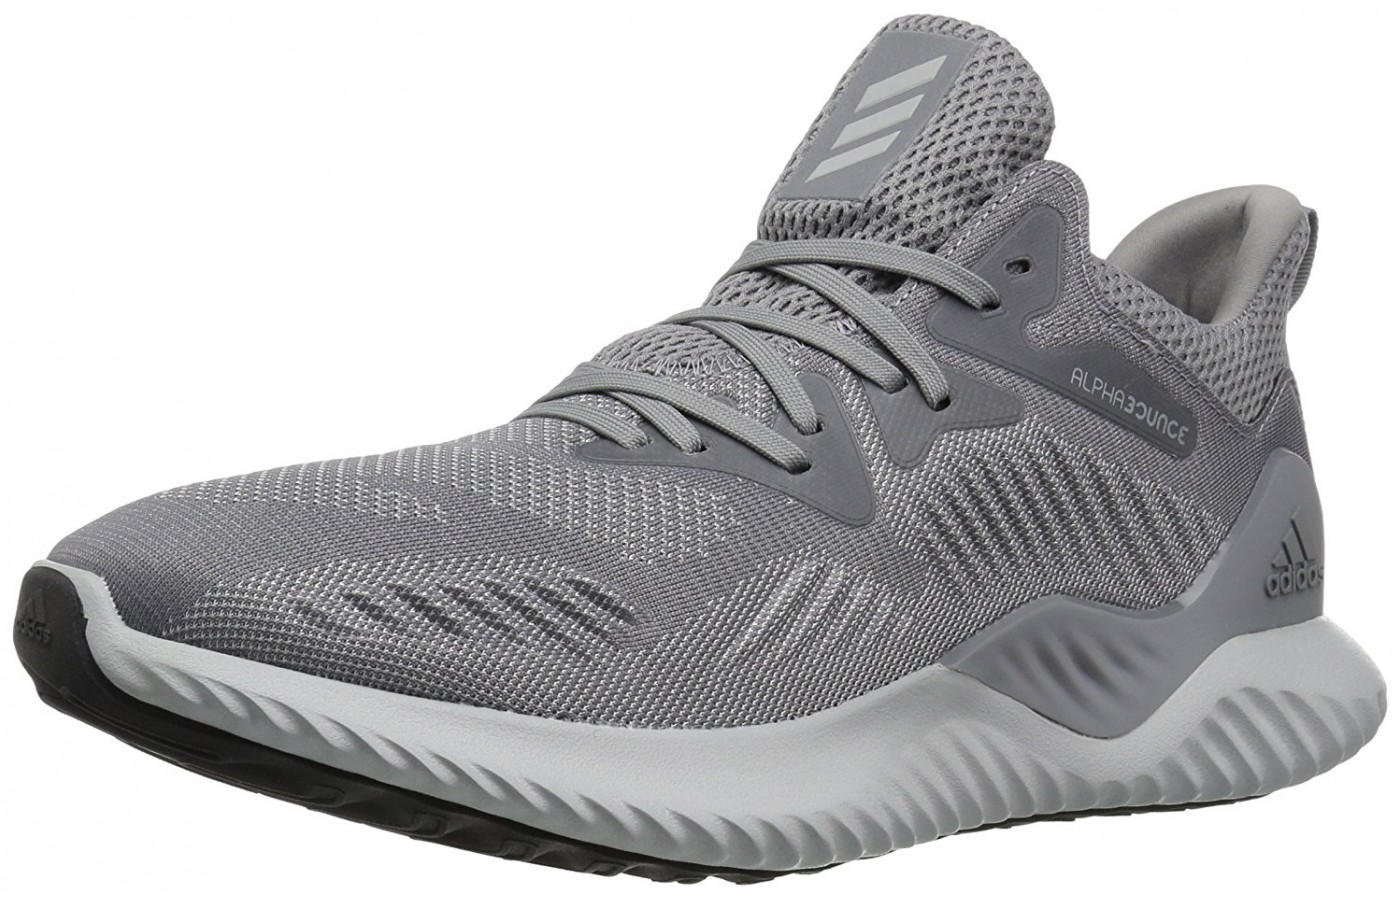 Adidas Alphabounce Beyond Tested for 